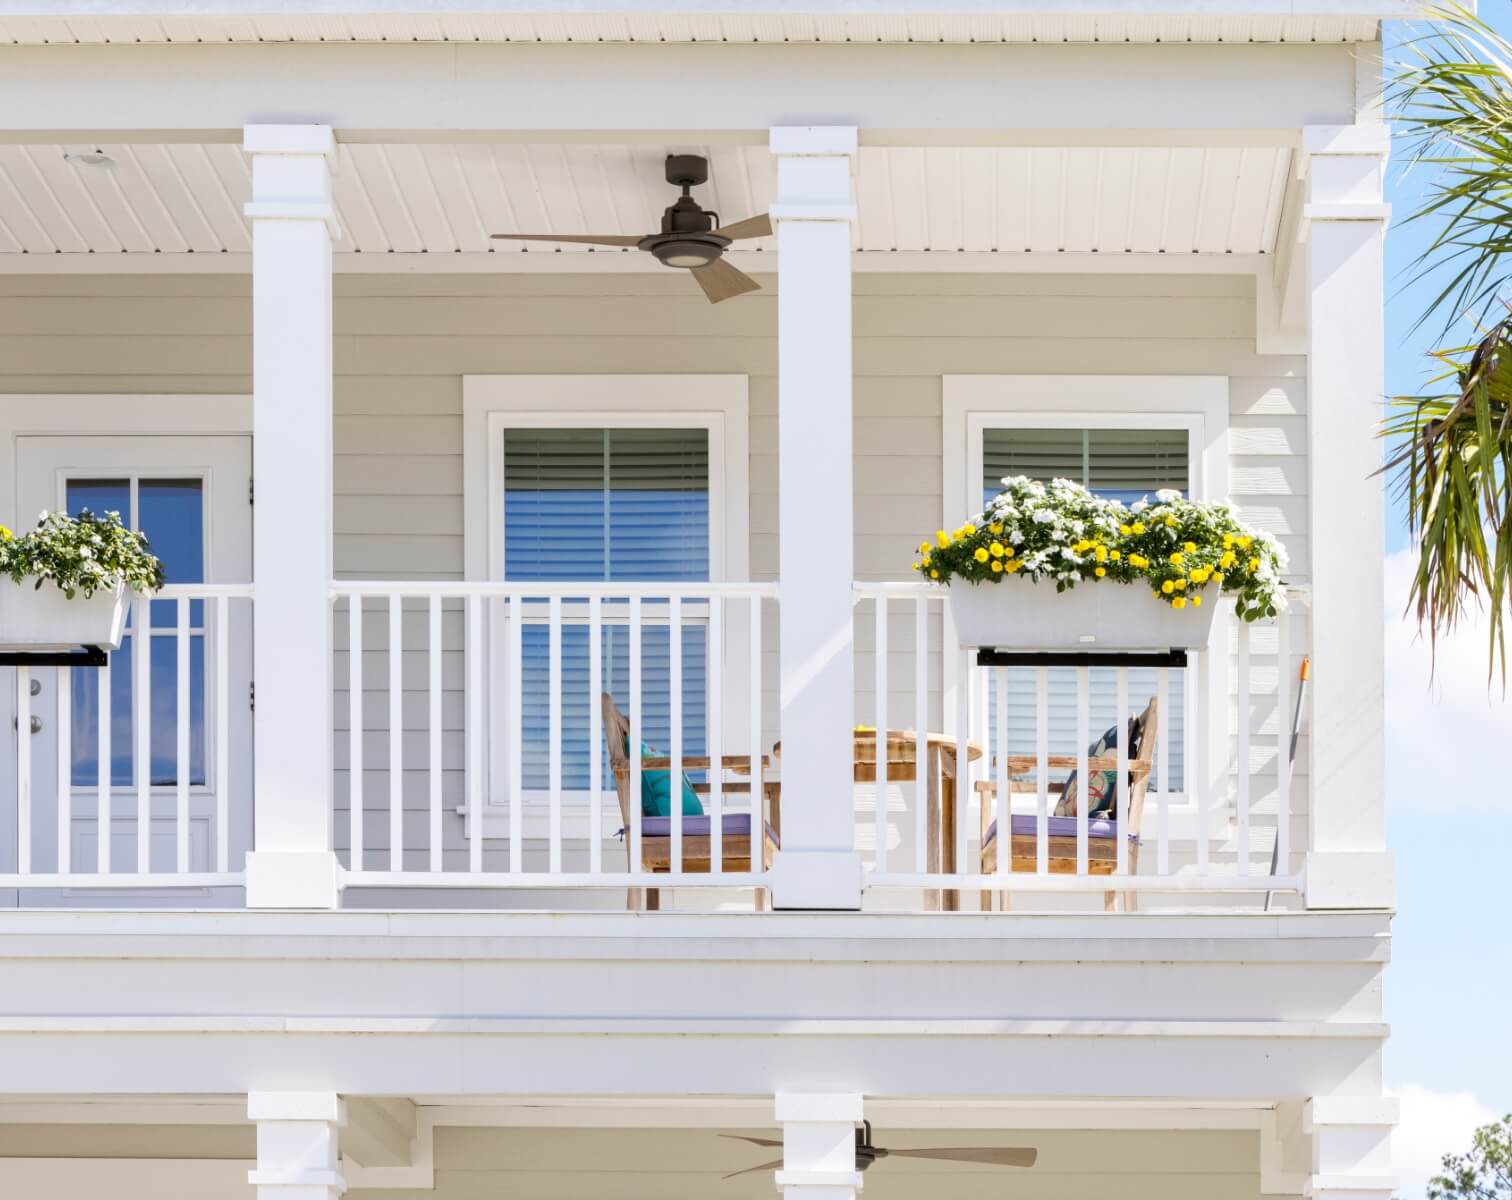 Second-story balcony of a Florida Lowcountry home in Wildlight with flower box, three windows and bistro set.